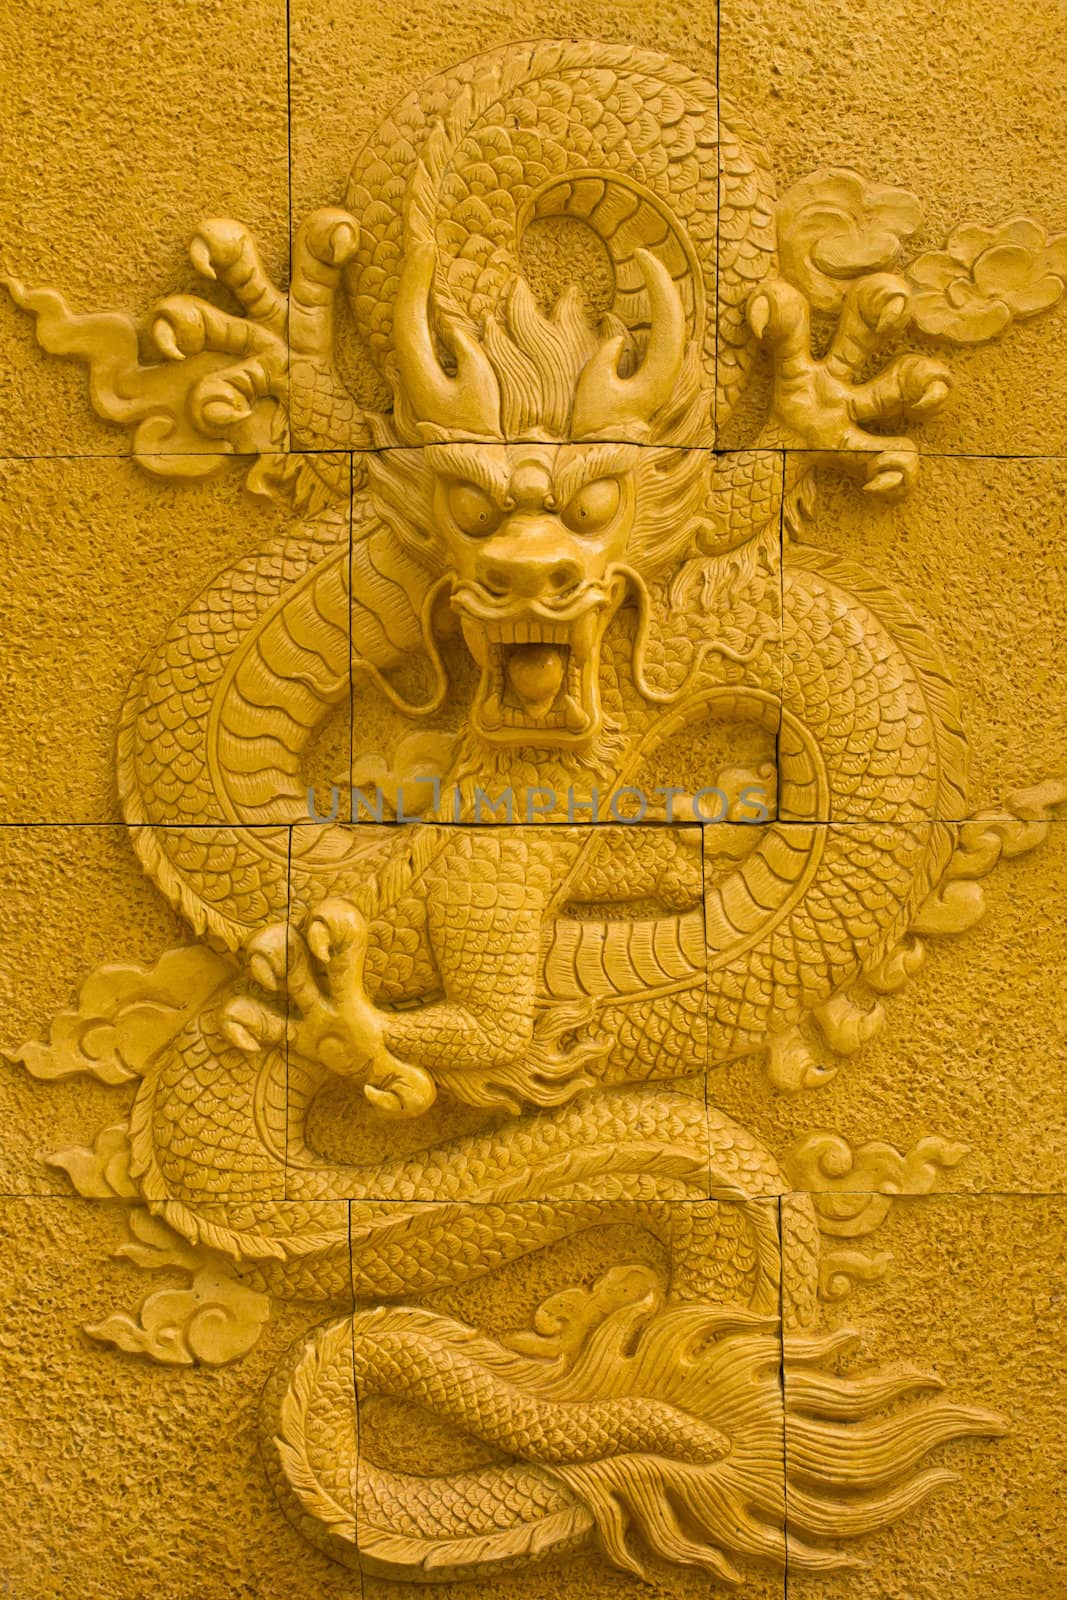 Dragon sculpture on the wall by Thanamat